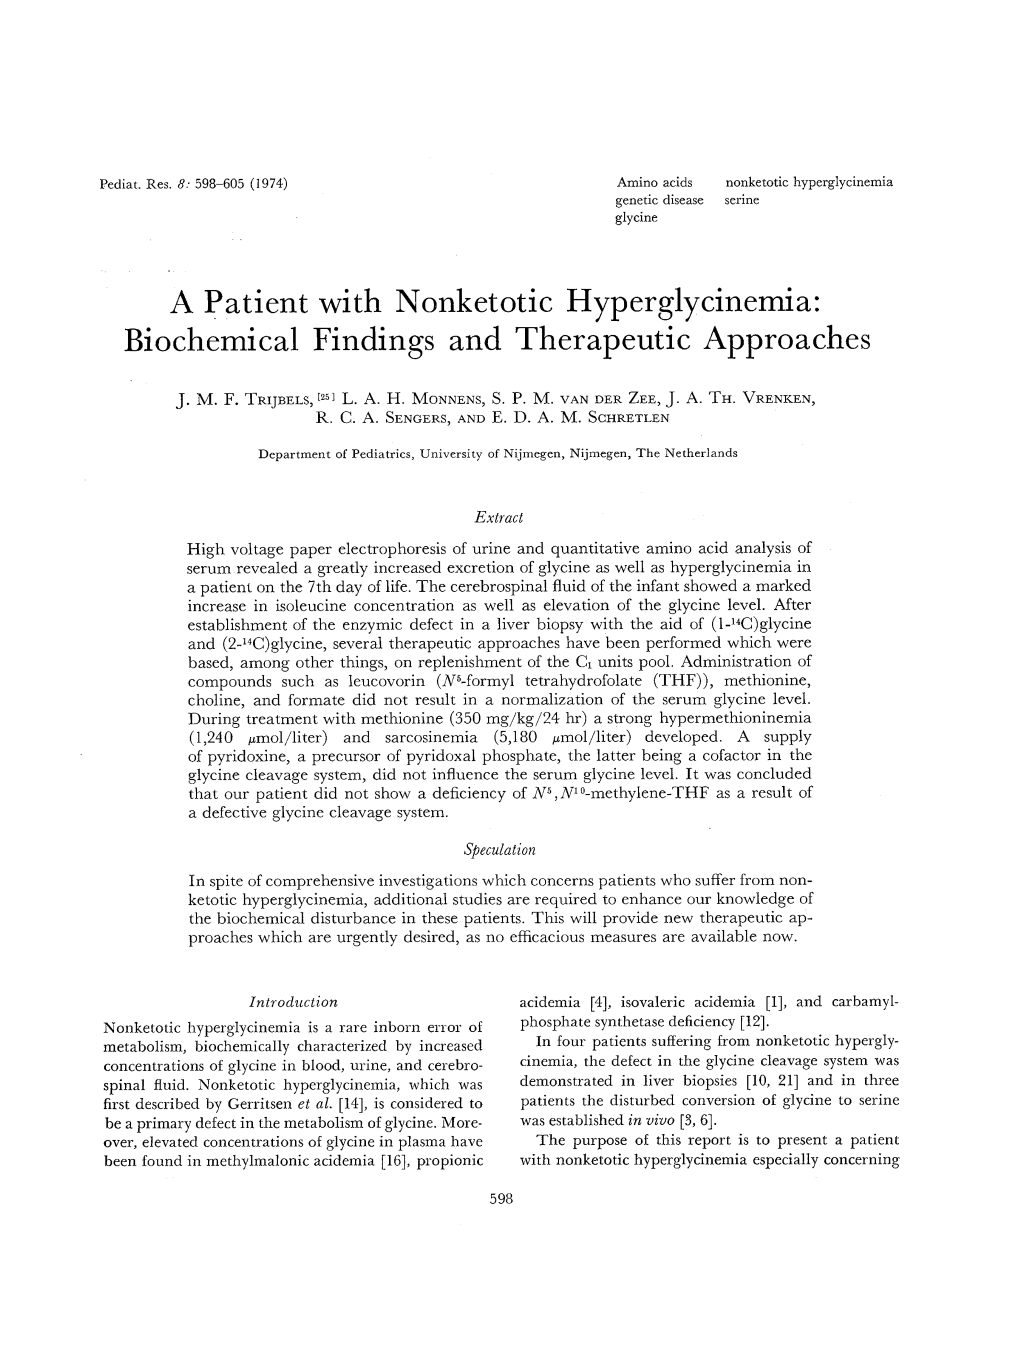 A Patient with Nonketotic Hyperglycinemia: Biochemical Findings and Therapeutic Approaches